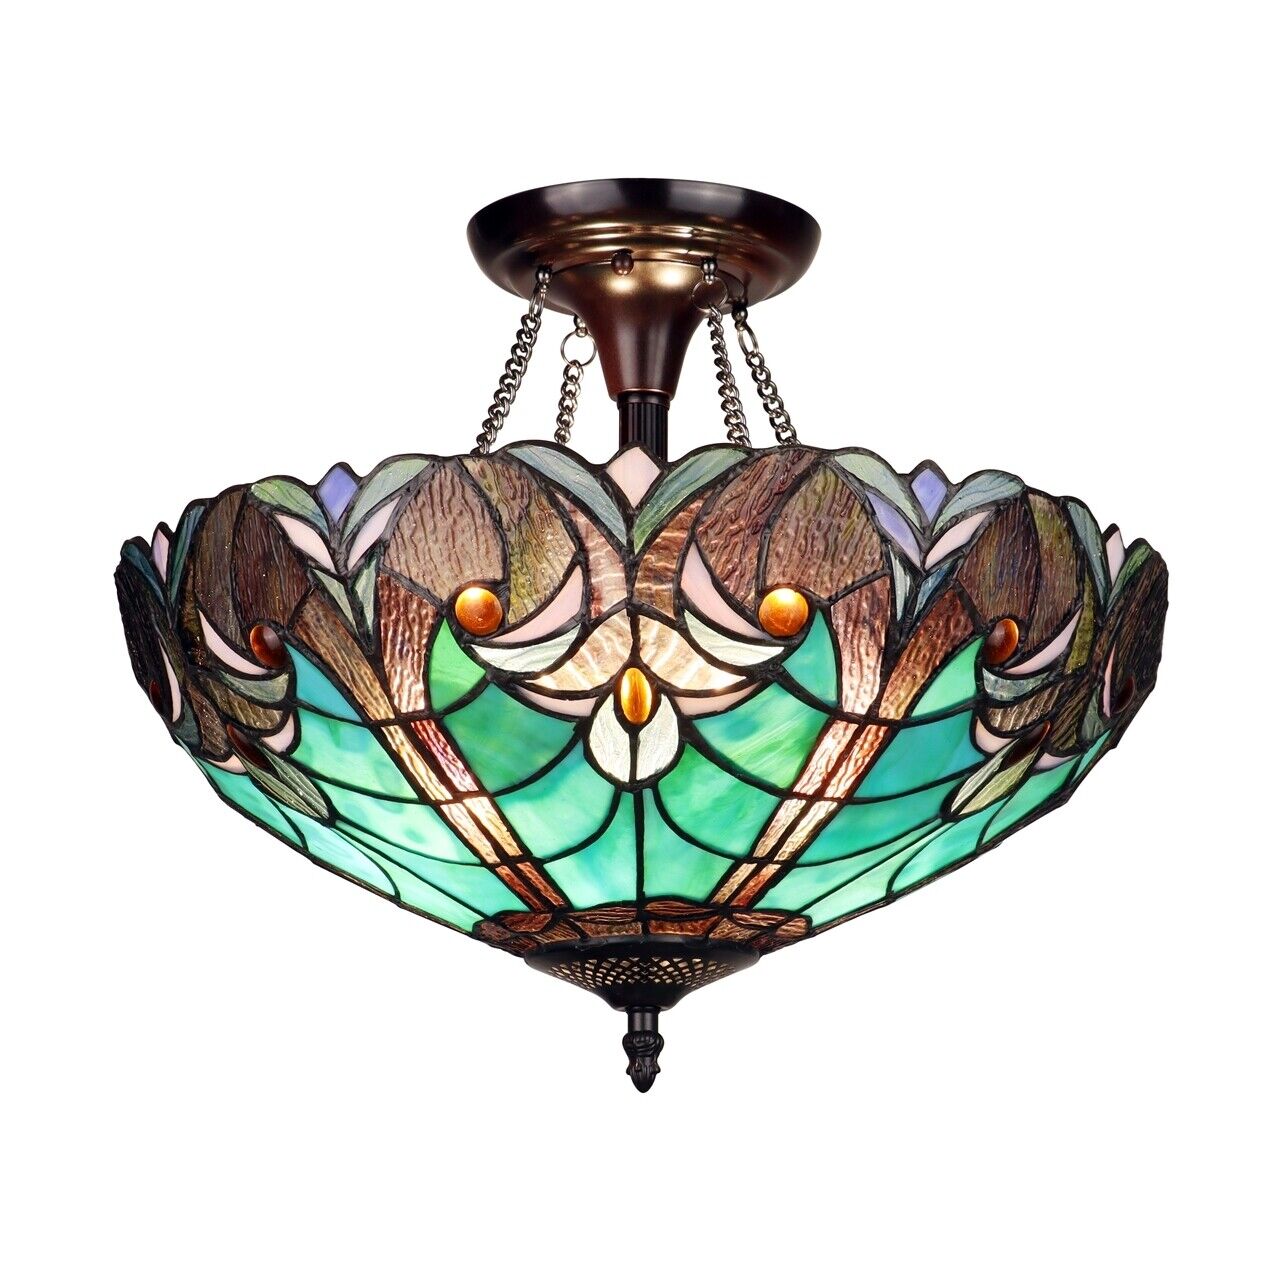 15.75" Stained Glass Semi Flush Ceiling Uplight